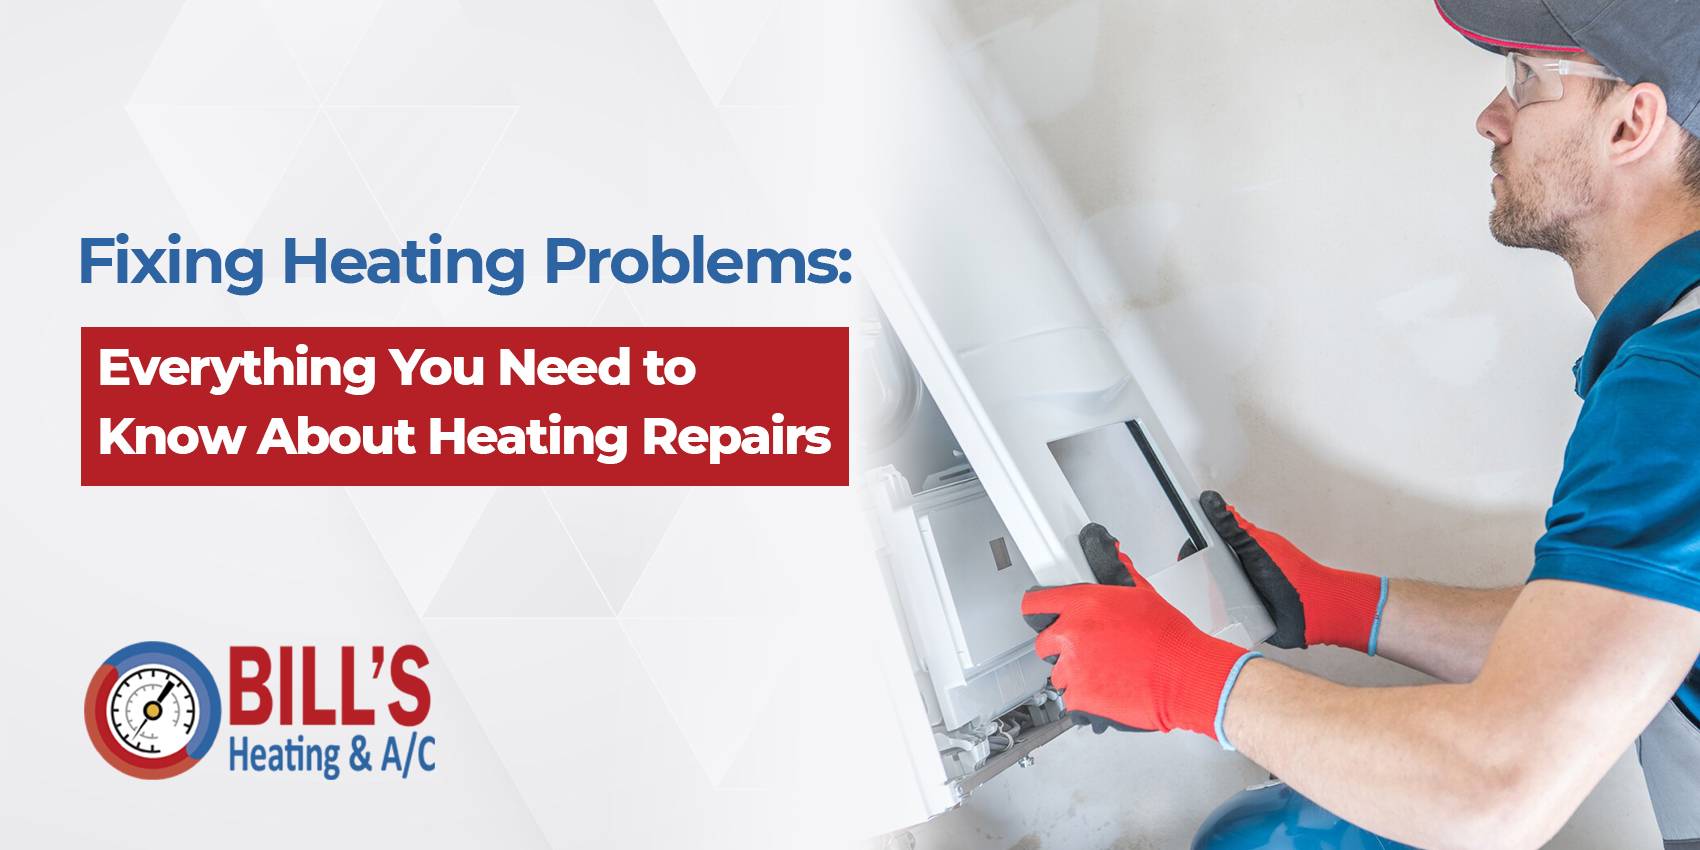 Bills Fixing Heating Problems Everything You Need to Know About Heating Repairs